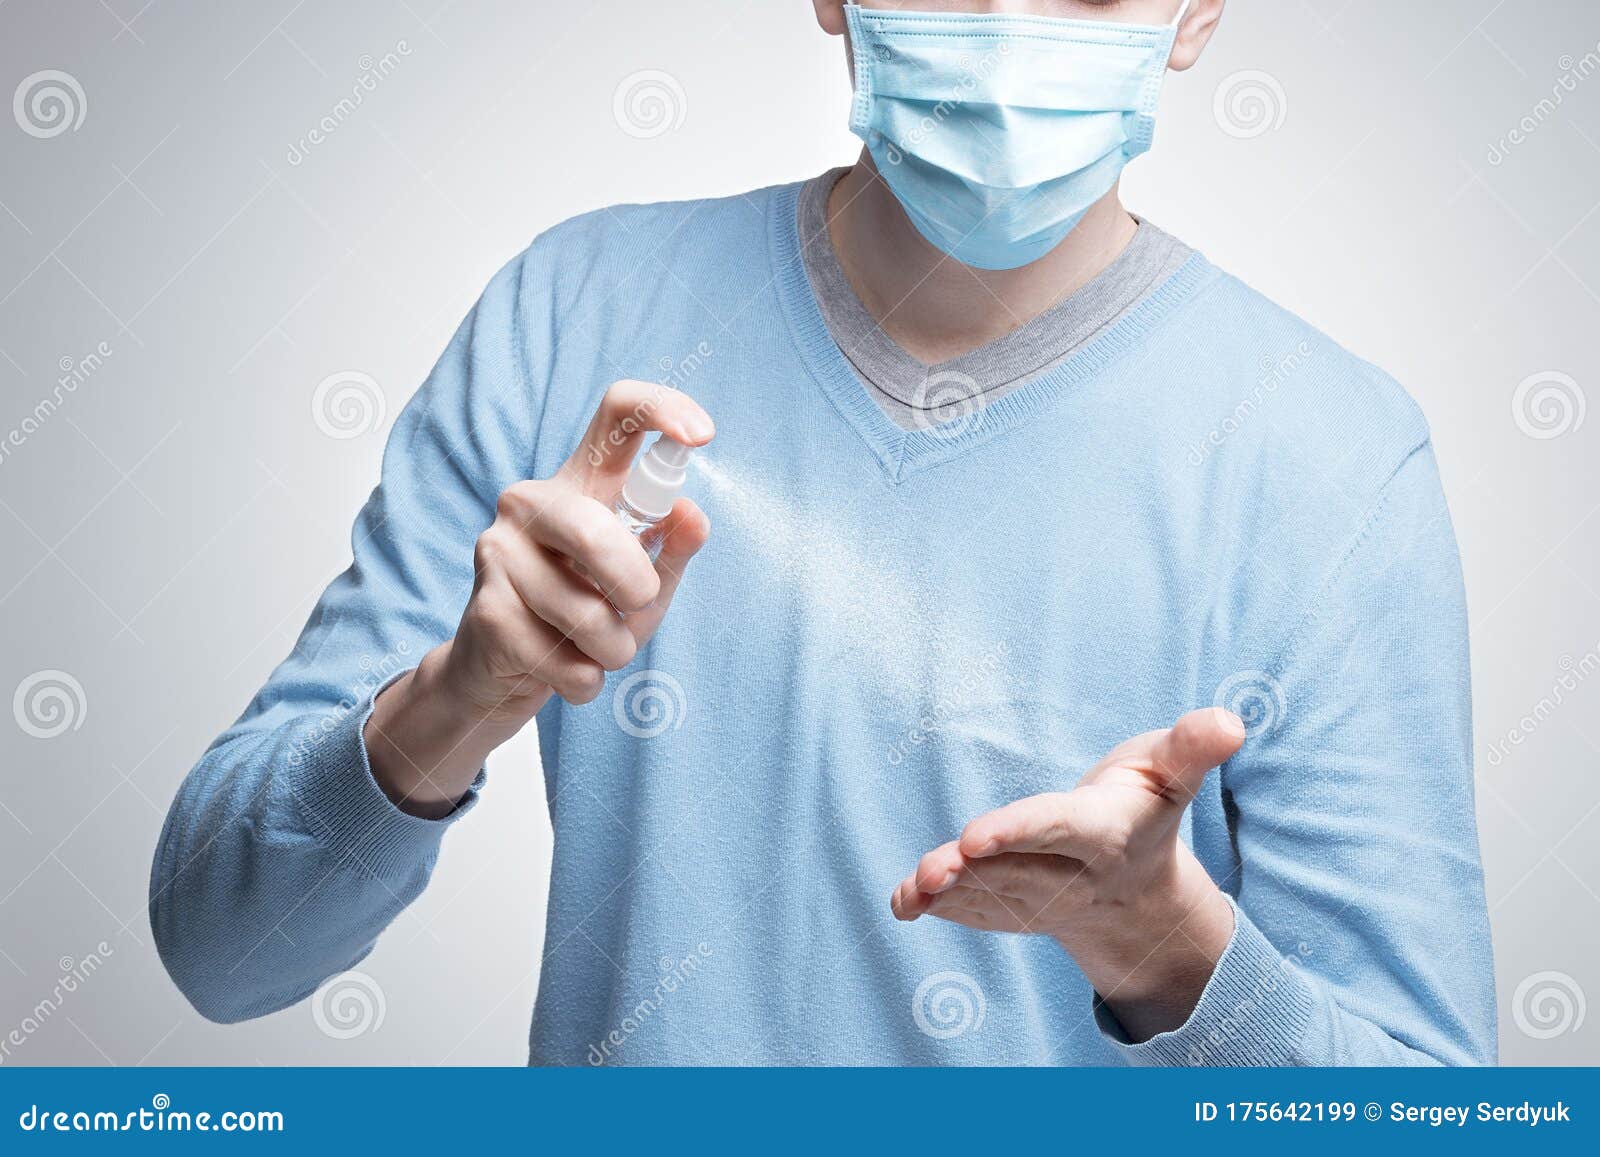 a man in a medical protective masked face mask, a means of protection against the virus, uses a spray to disinfect hands. epidemia